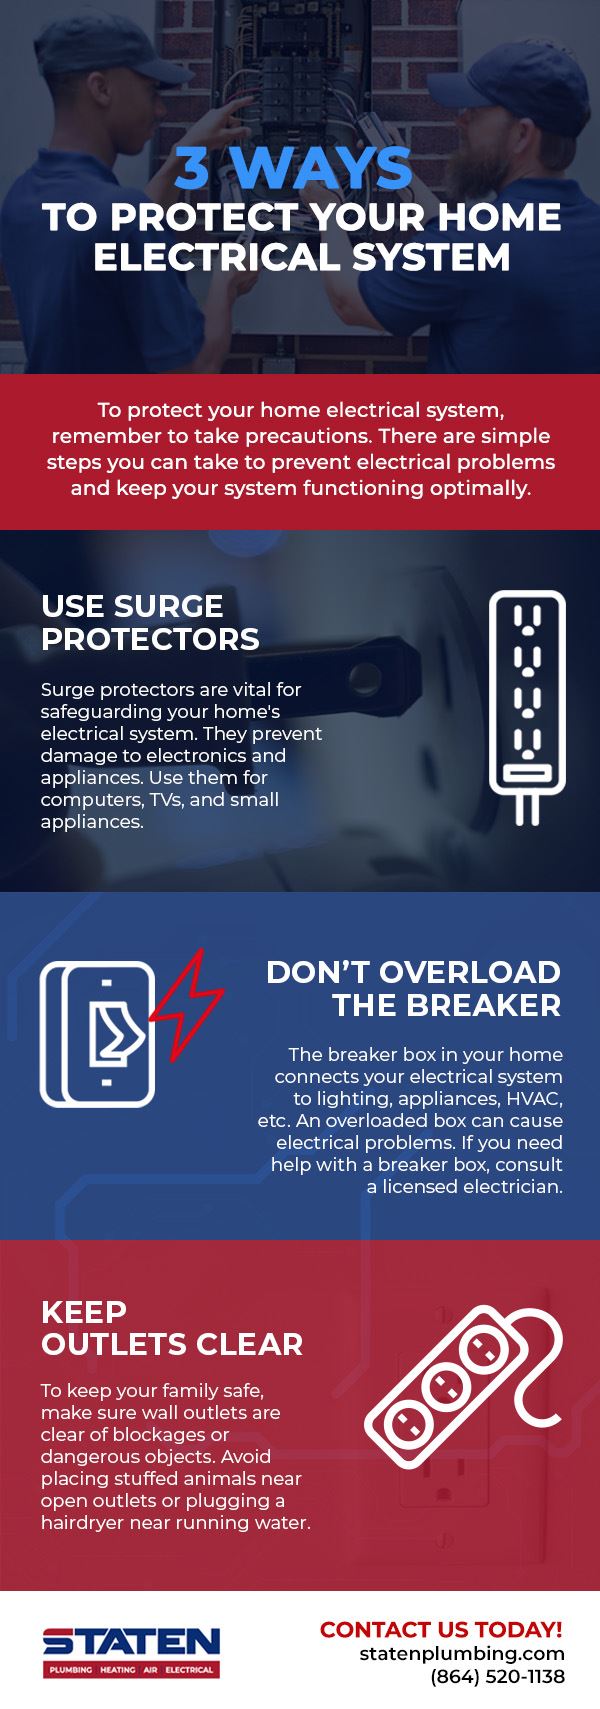 3 Ways to Protect Your Home Electrical System